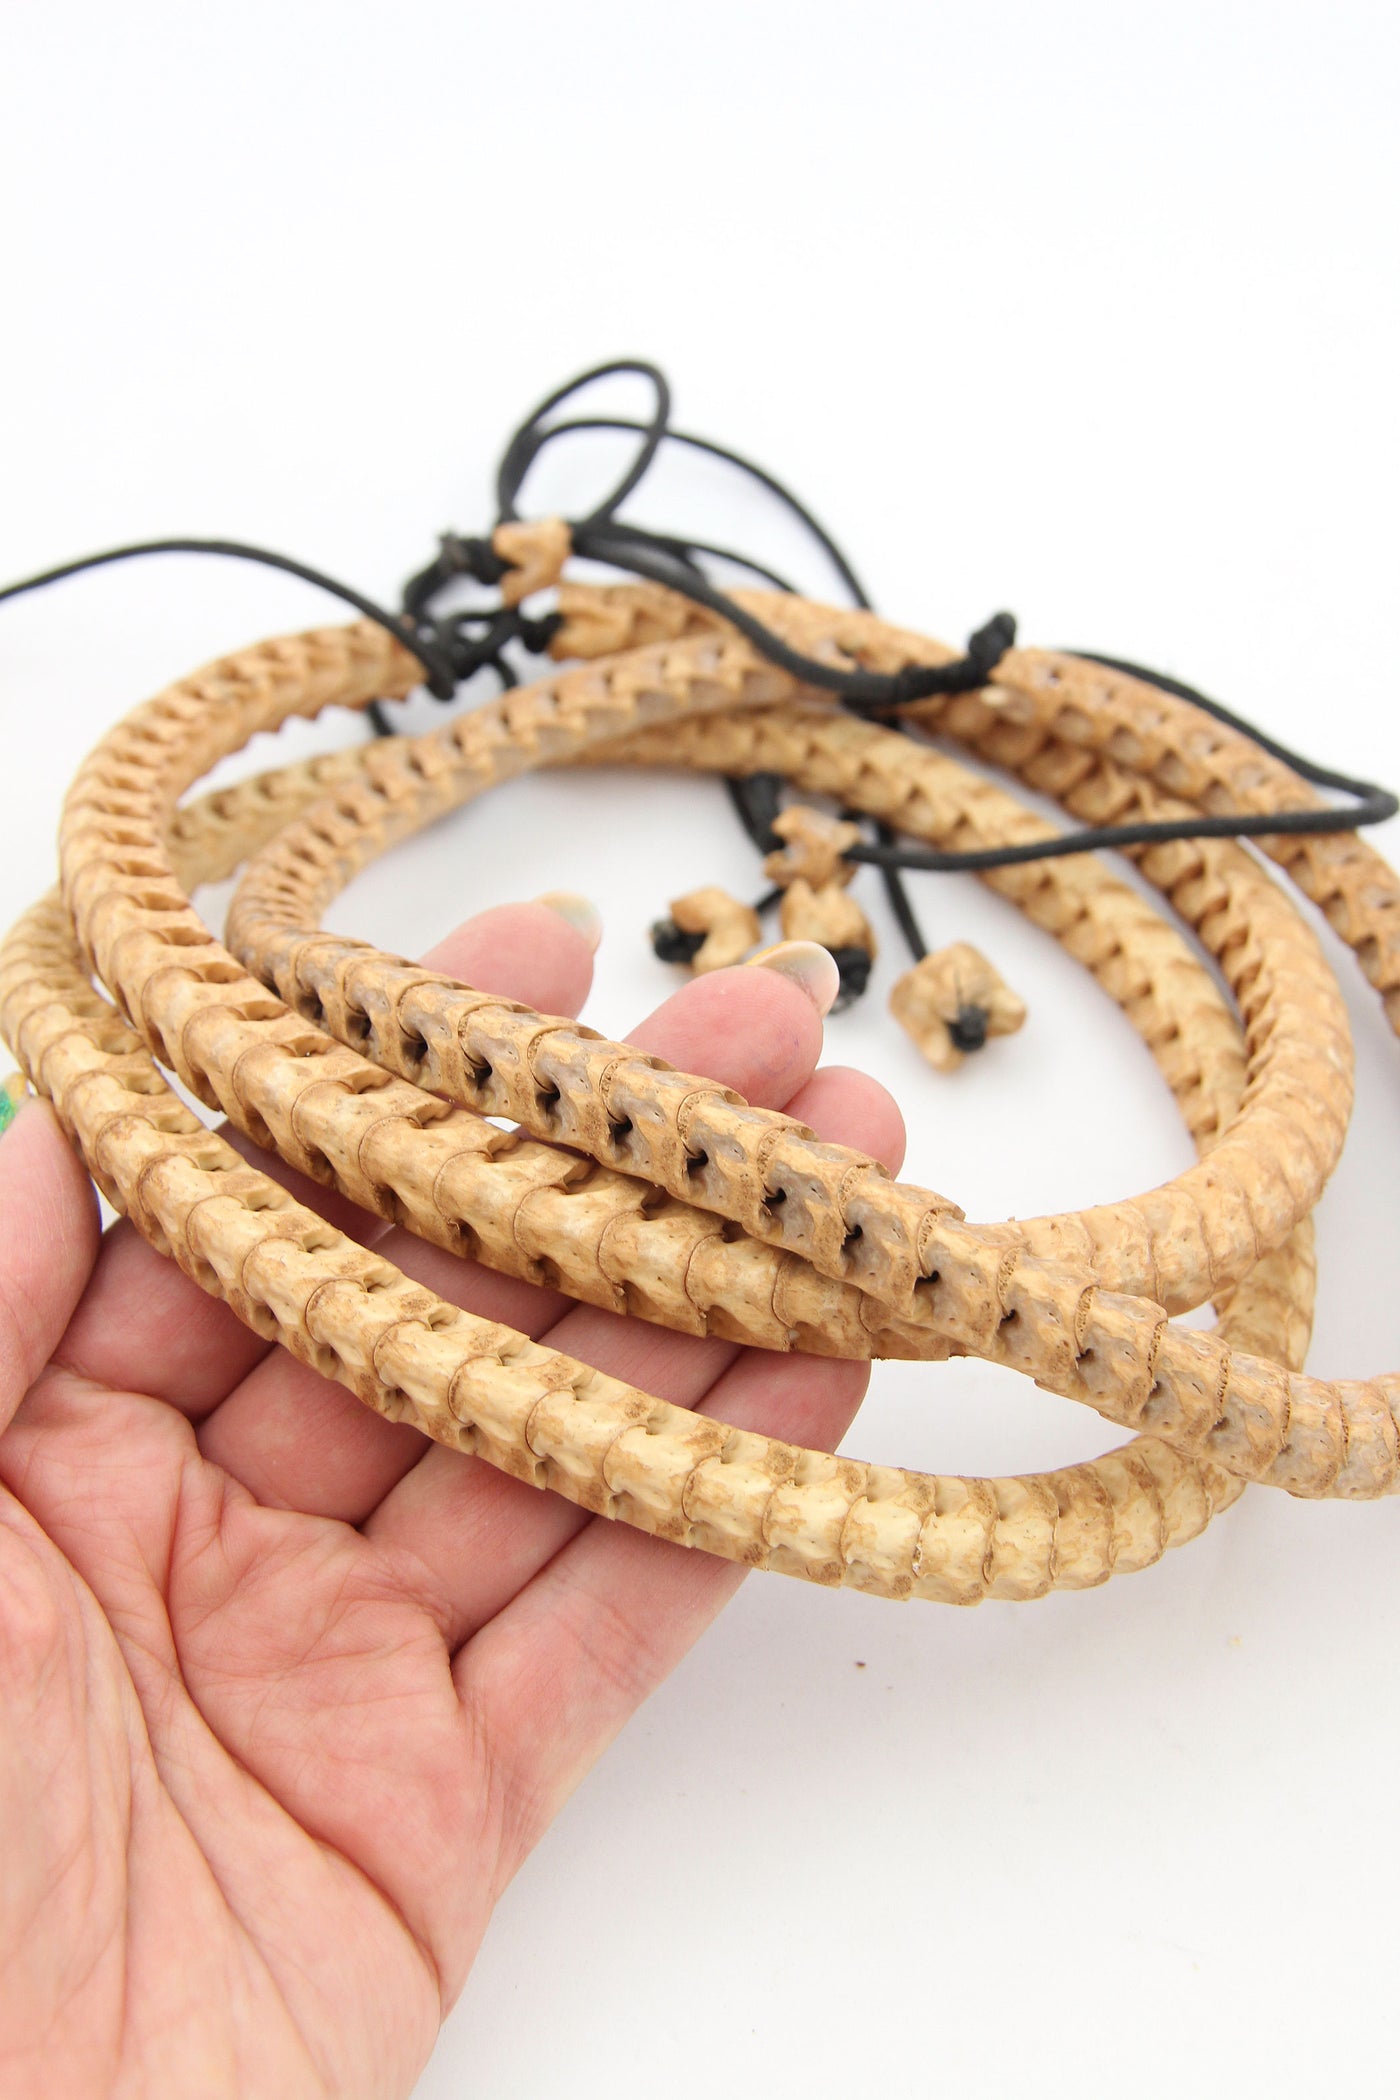 Authentic Snake Bead Necklace, from Thailand, for Protection